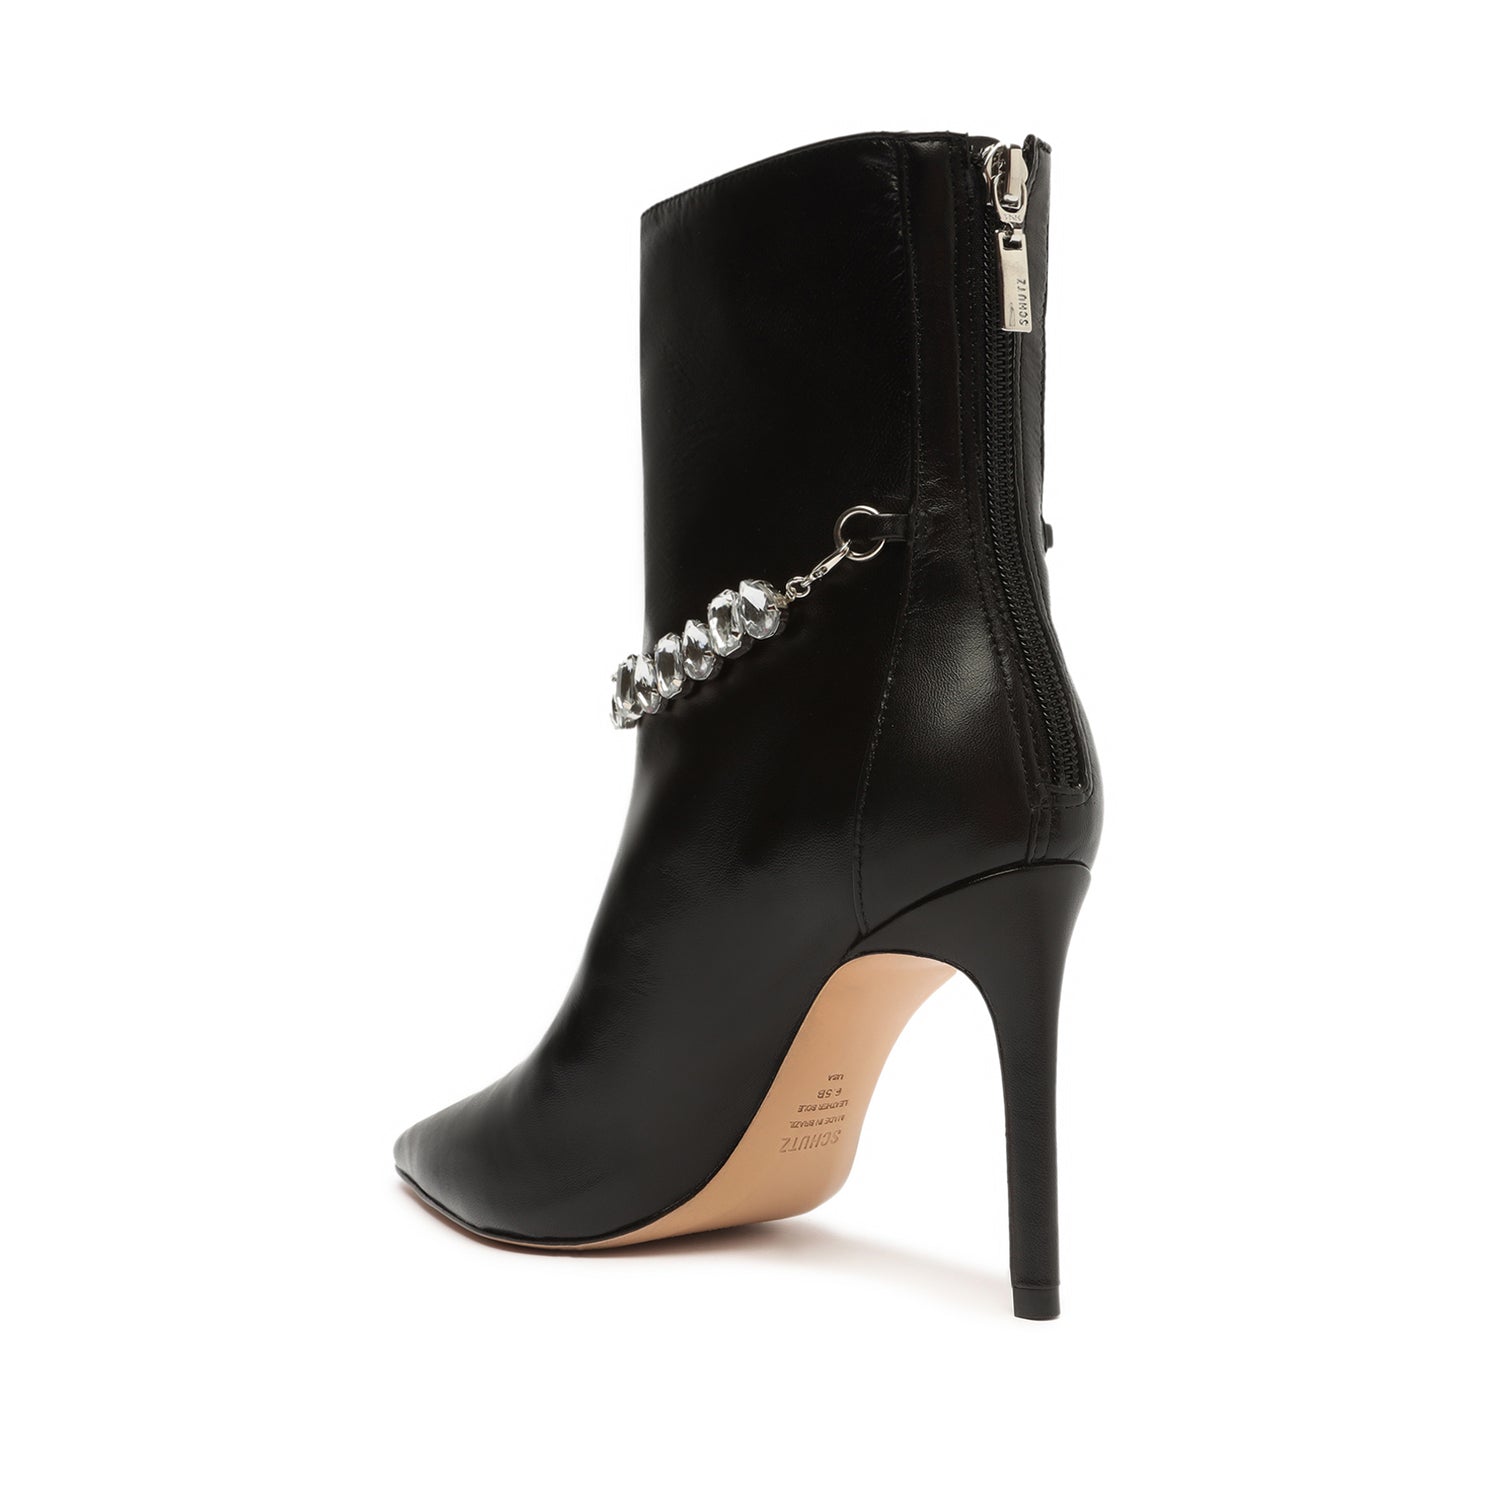 Rhea Nappa Leather Bootie Booties OLD    - Schutz Shoes